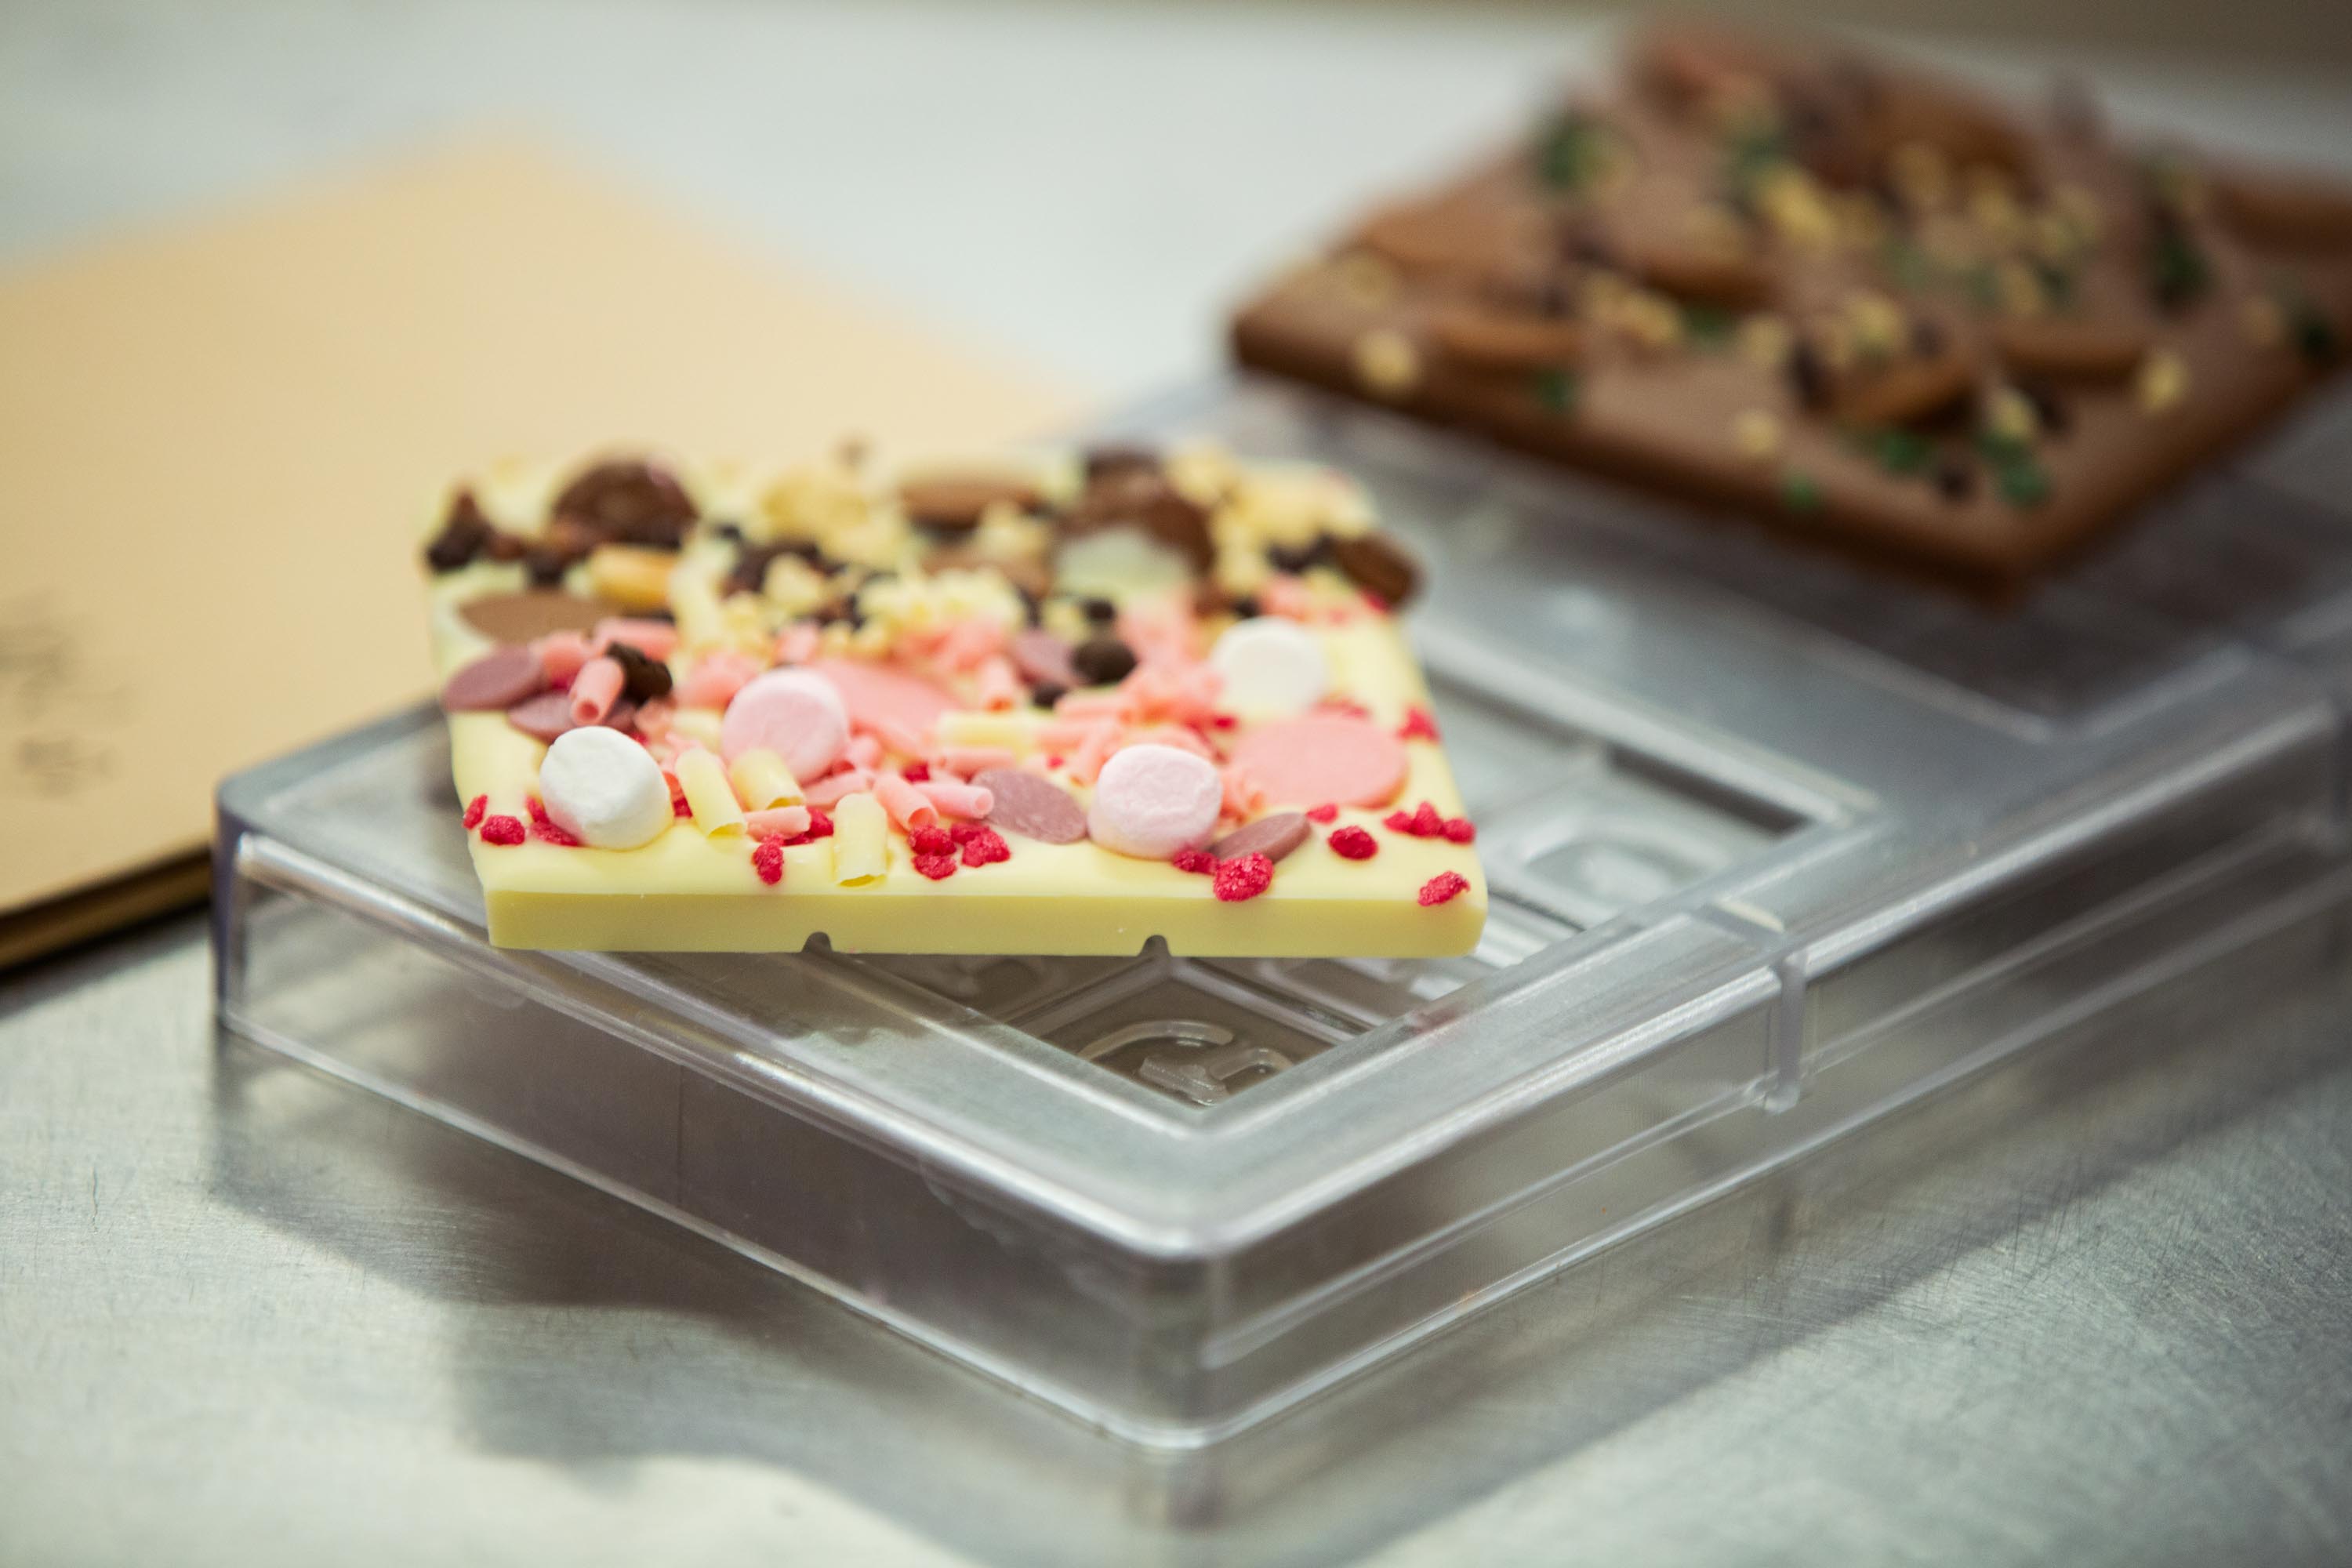 Create your own personalised chocolate bar at the chocolate factory